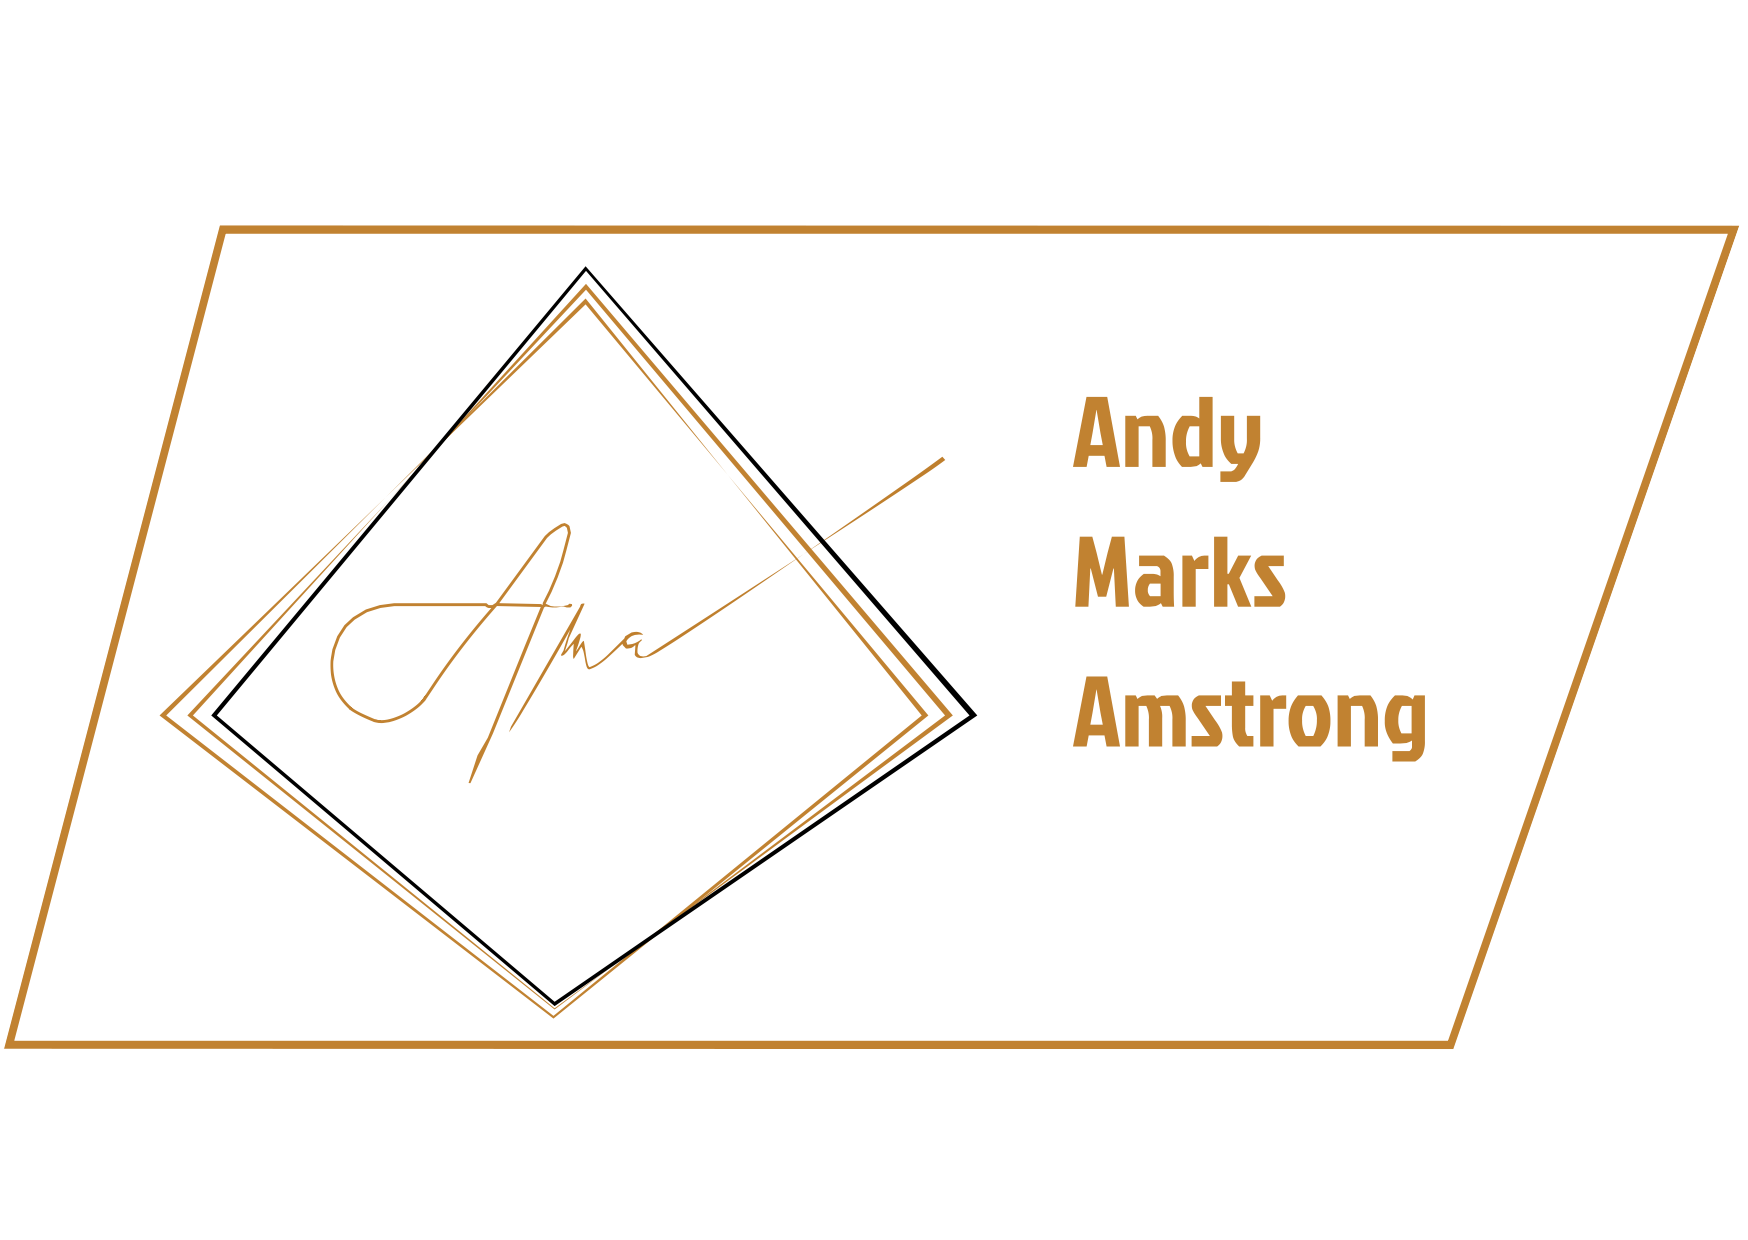 Andy Marks Amstrong lecture émotionnelle